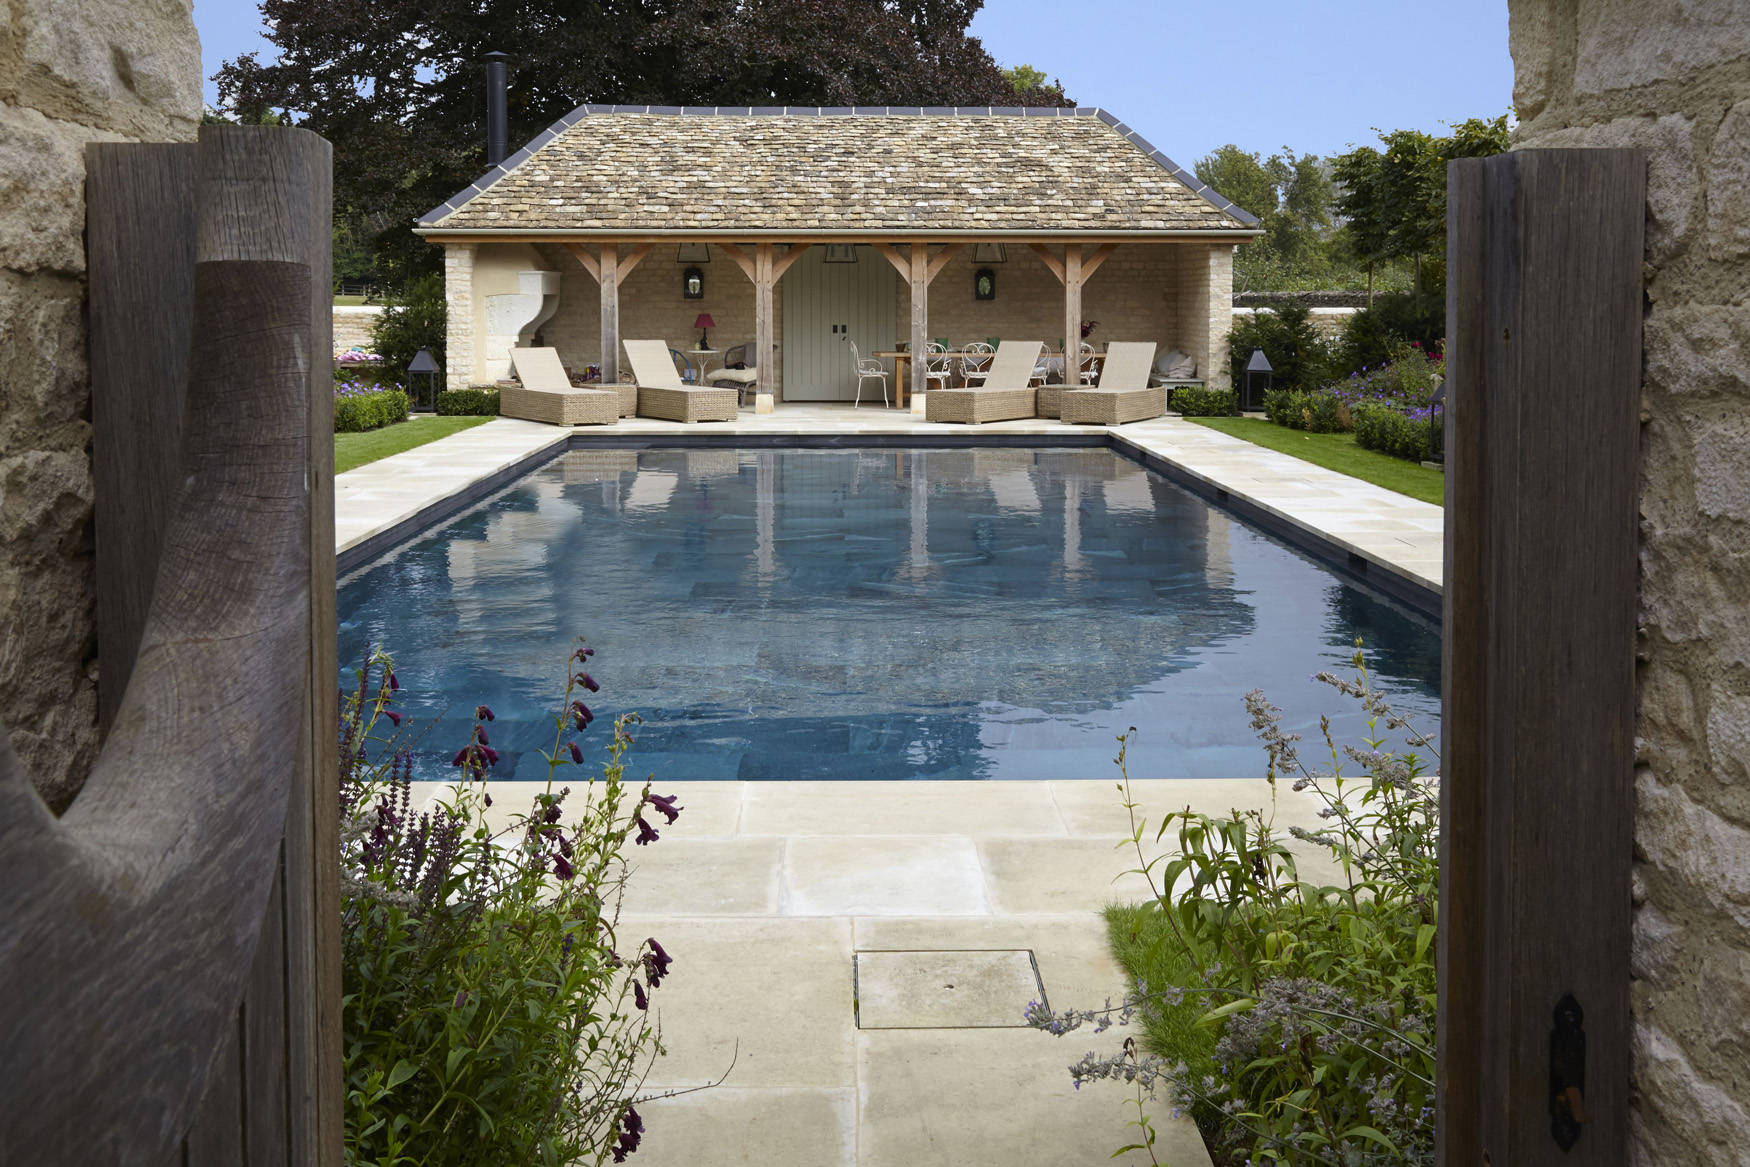 Rustic outdoor kitchen pool nestled in the Oxfordshire countryside